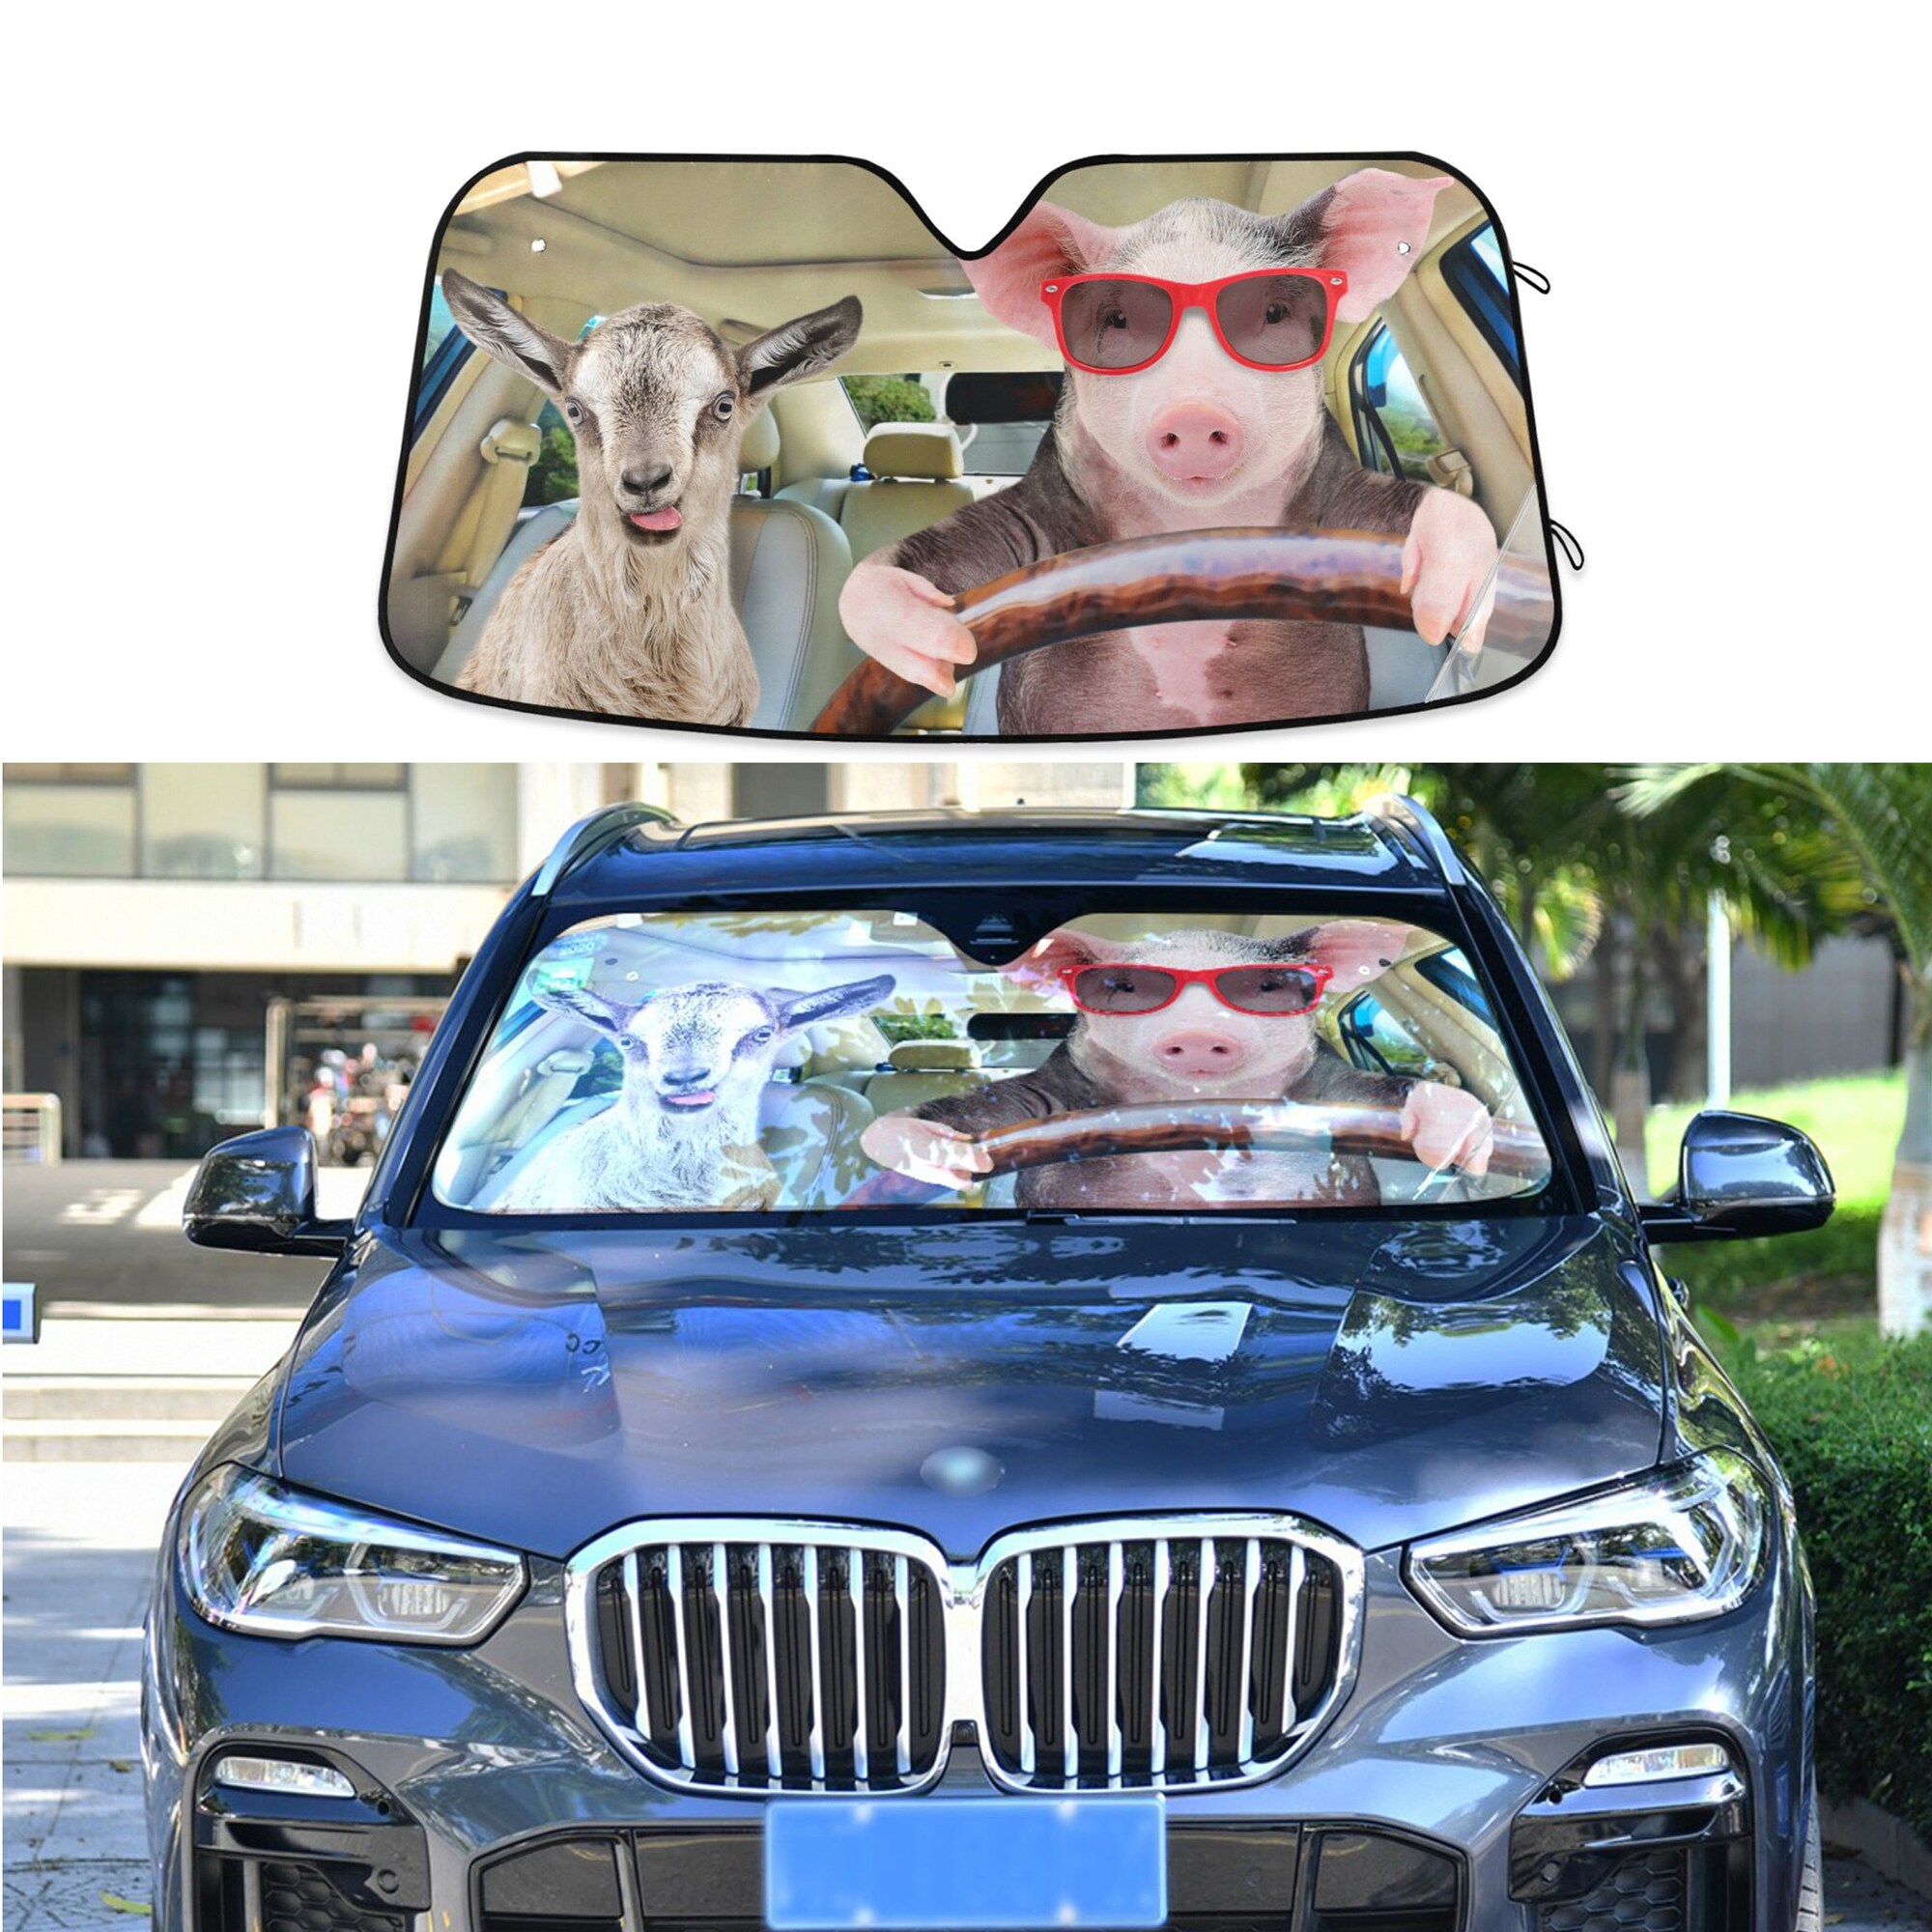 Discover Pig in Sunglasses Carries in a Car a Goat, Car Auto Sun Shade